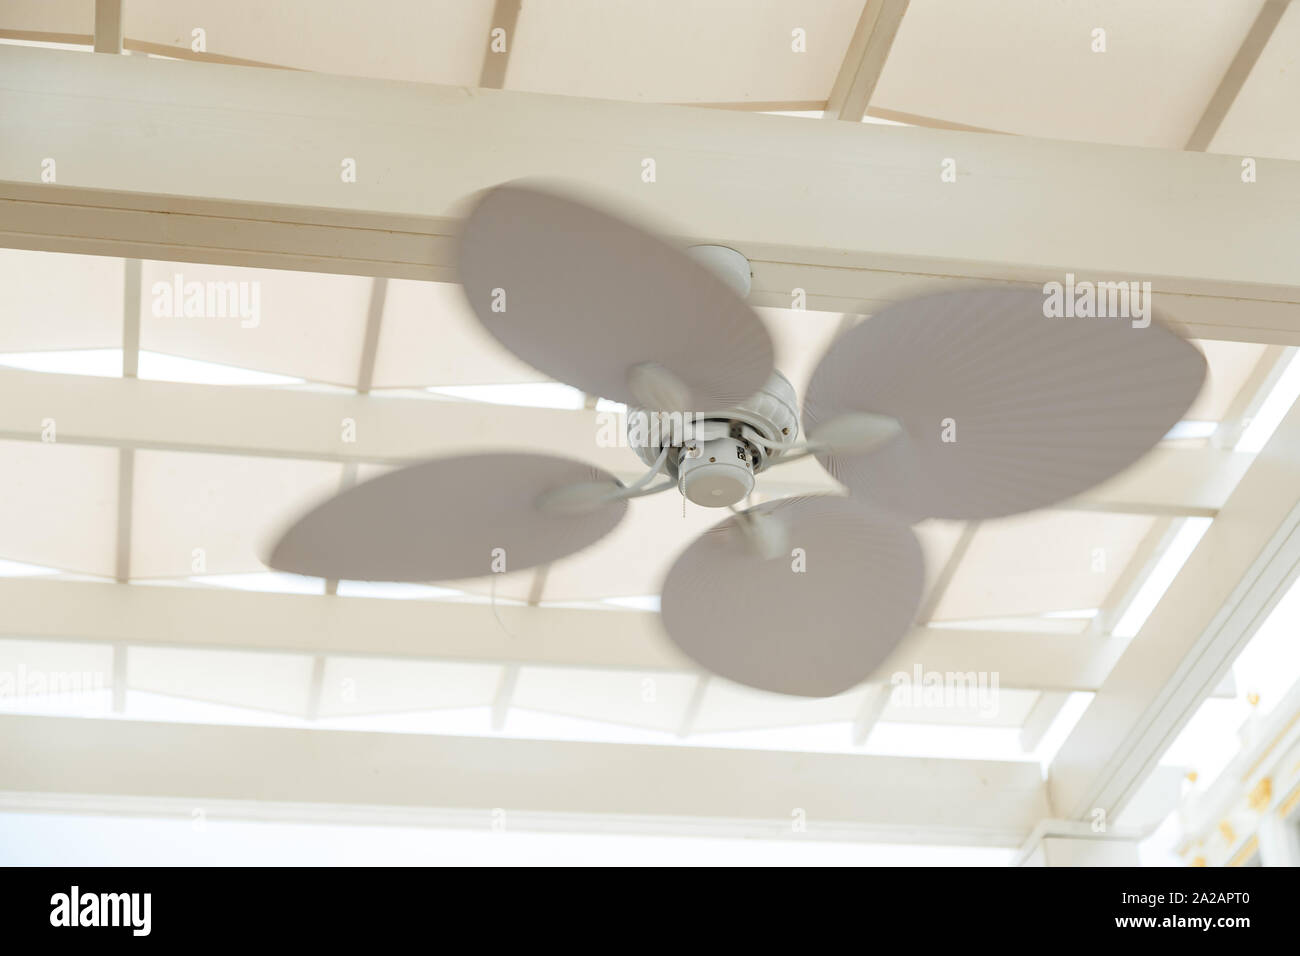 Ceiling Fan In Outdoor Pergola Cafe Stock Photo 328463744 Alamy